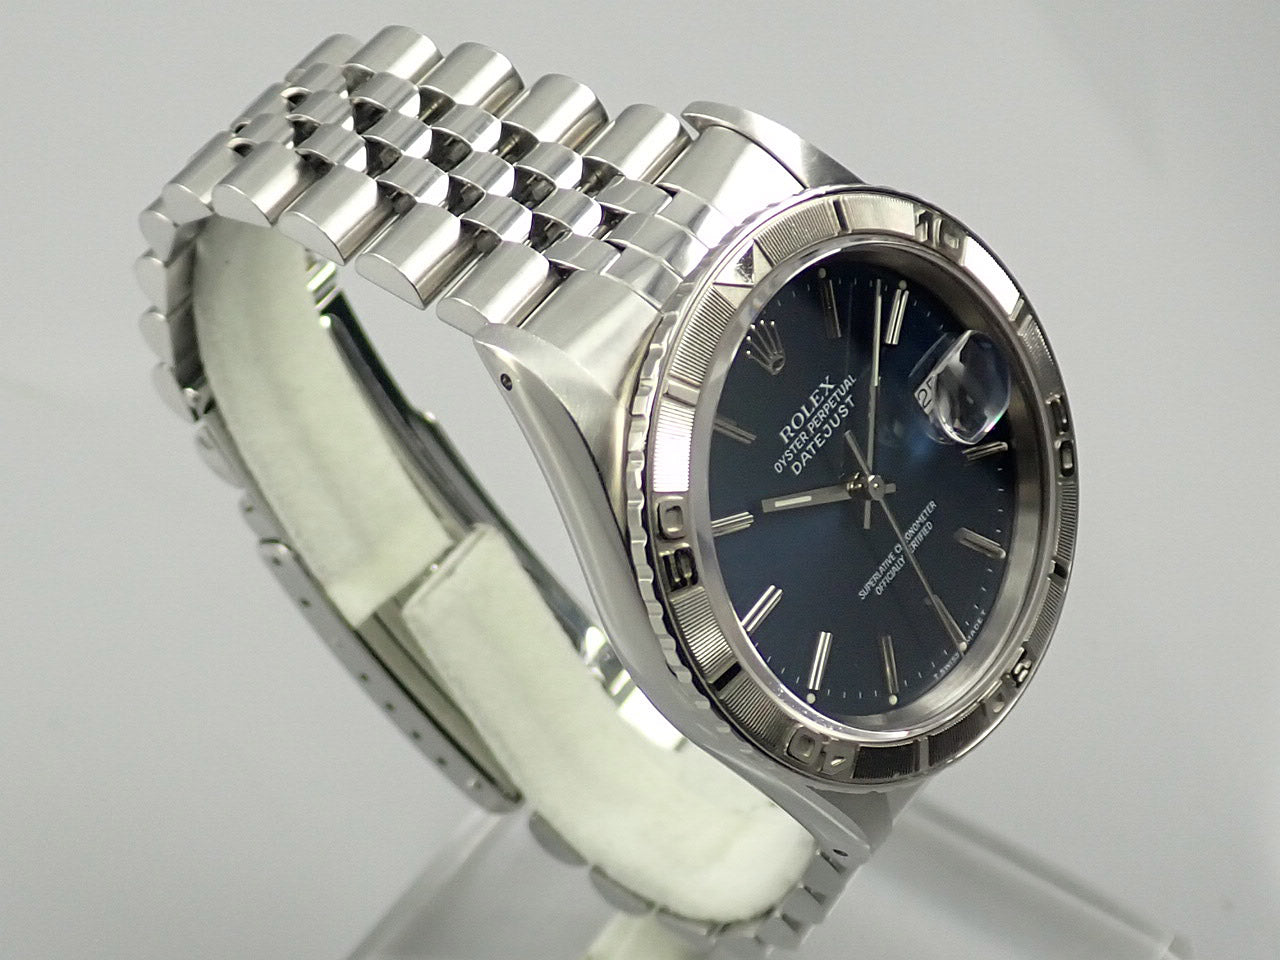 Rolex Datejust Thunderbird S serial number &lt;Warranty and box&gt;